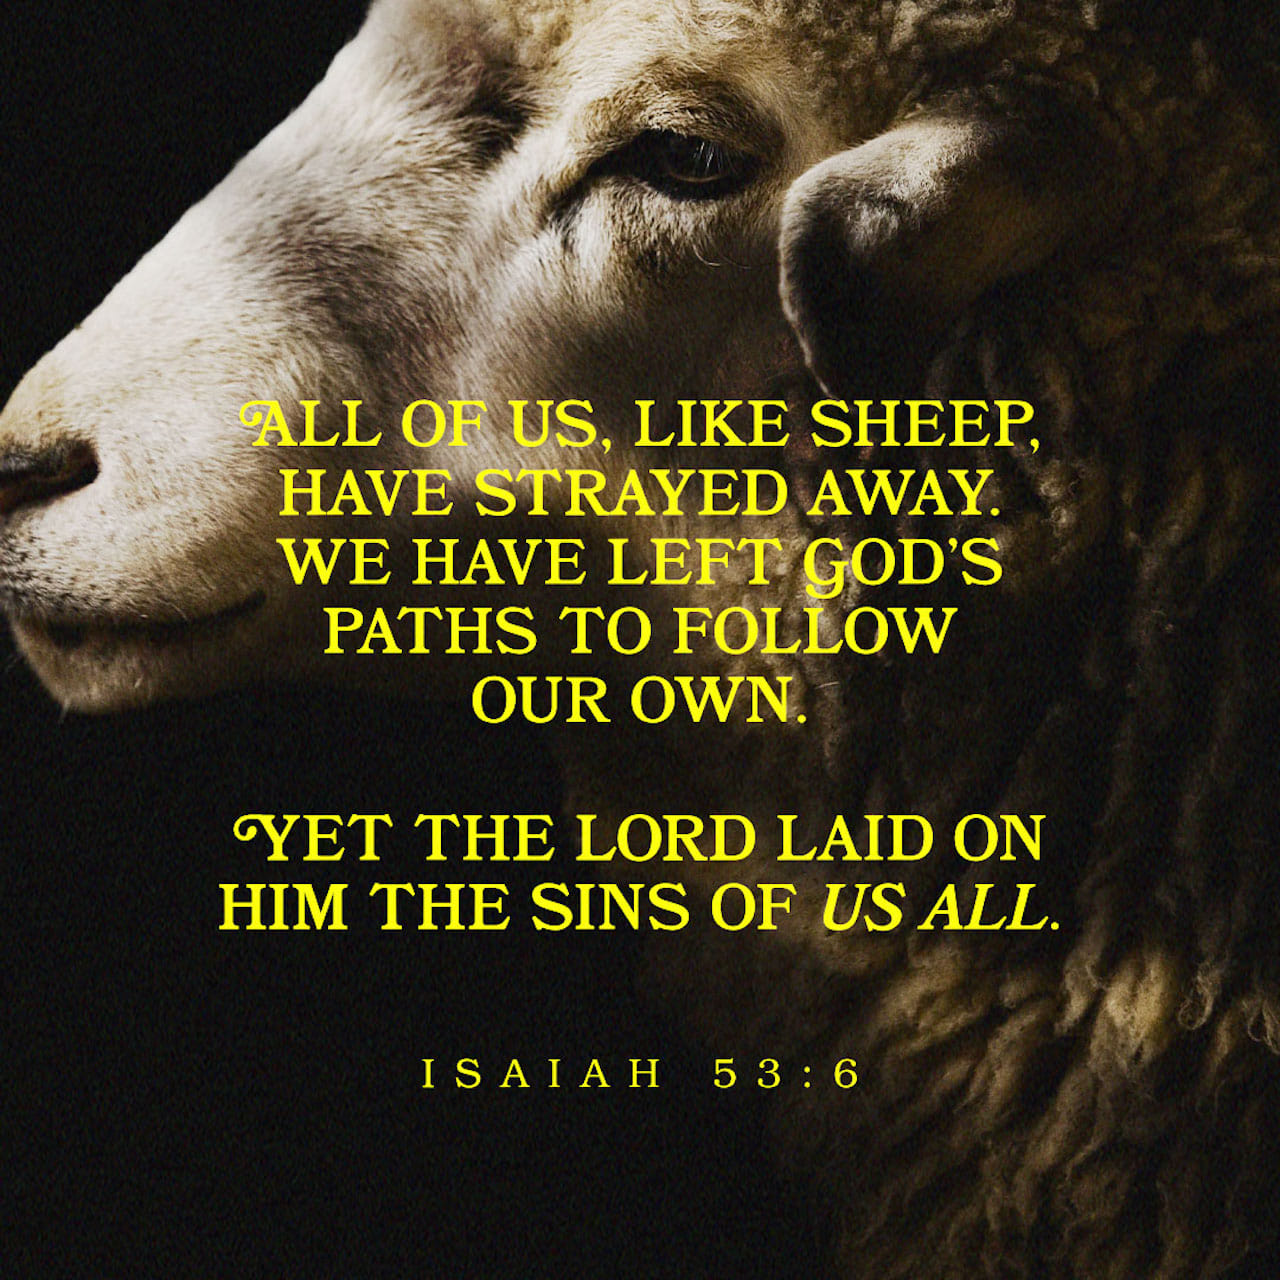 Isaiah 53:6 All we like sheep have gone astray; we have turned every one to his own way; and the LORD hath laid on him the iniquity of us all. | King James Version (KJV) | Download The Bible App Now